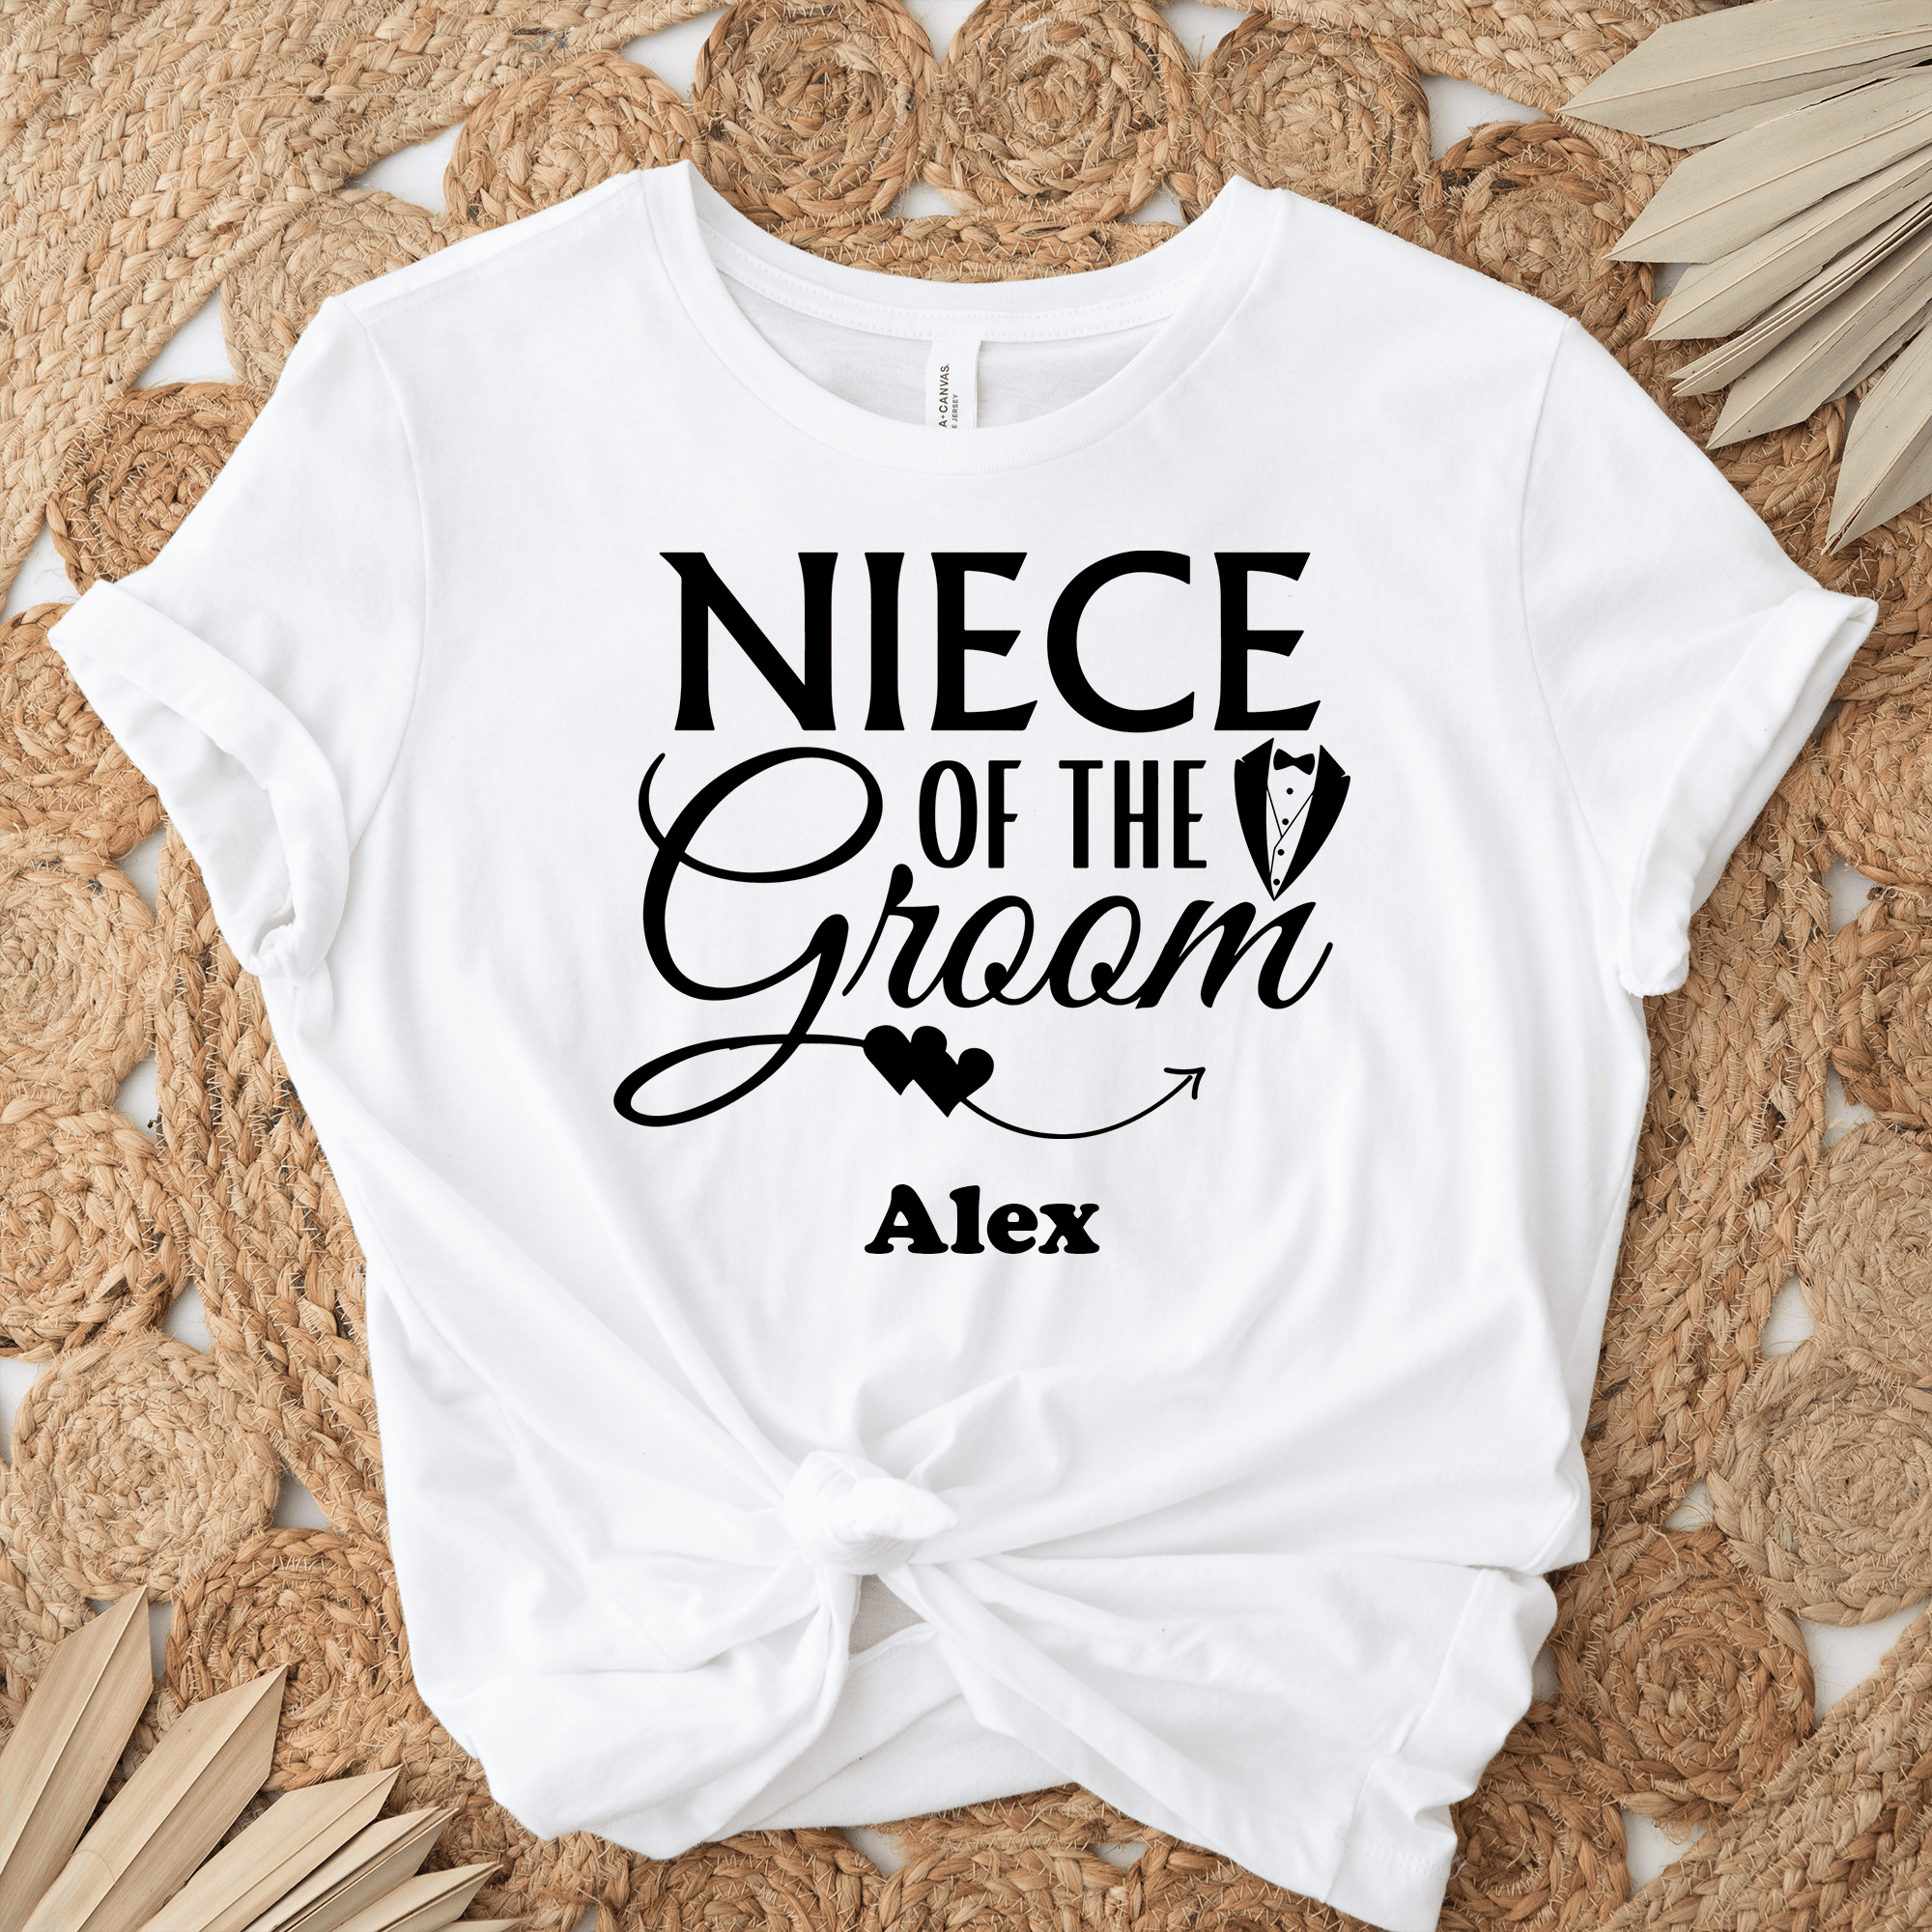 Light Blue Mens T-Shirt With Niece Of The Groom Design